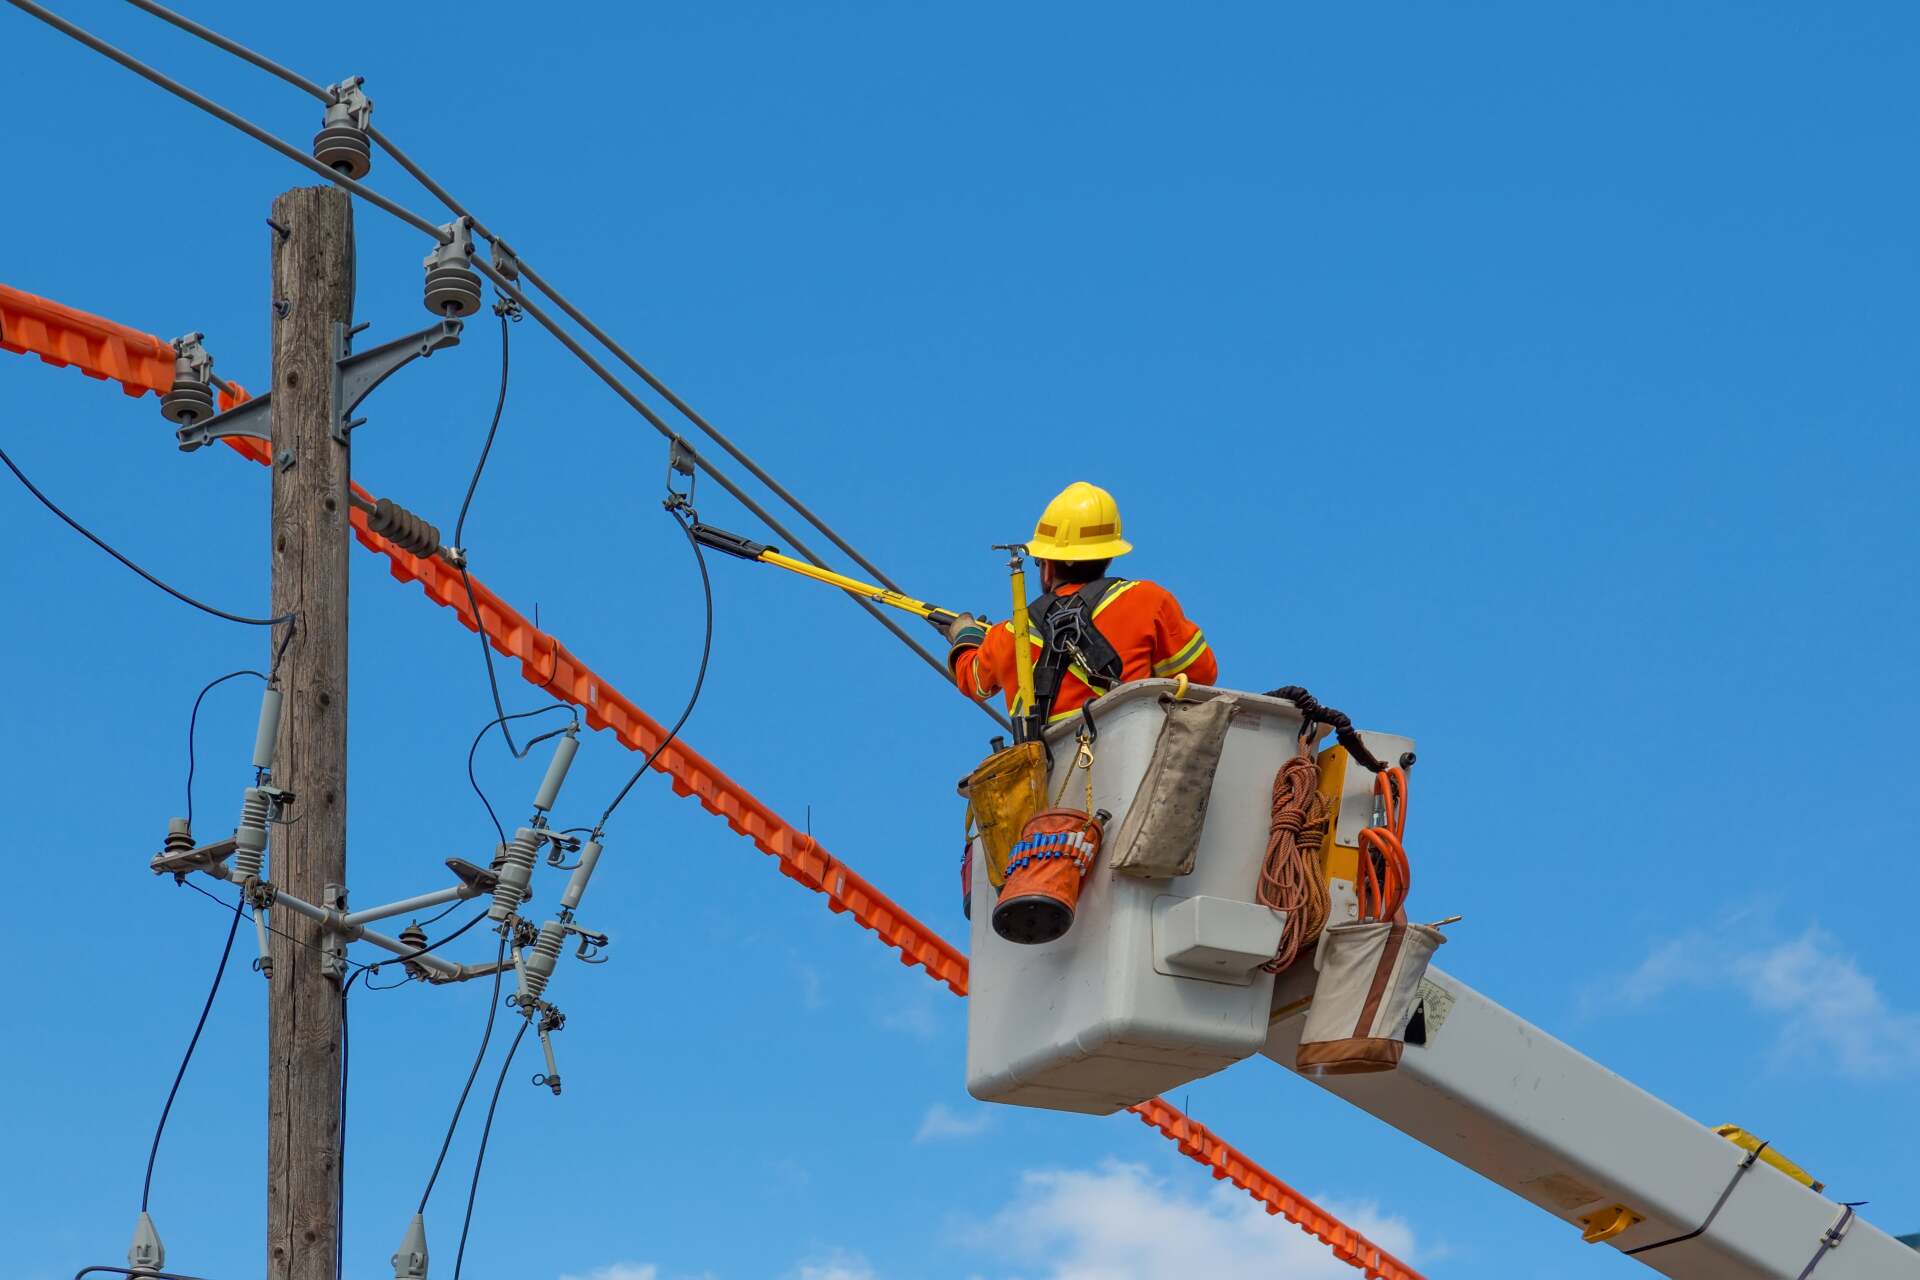 When should utility poles be repaired or replaced?